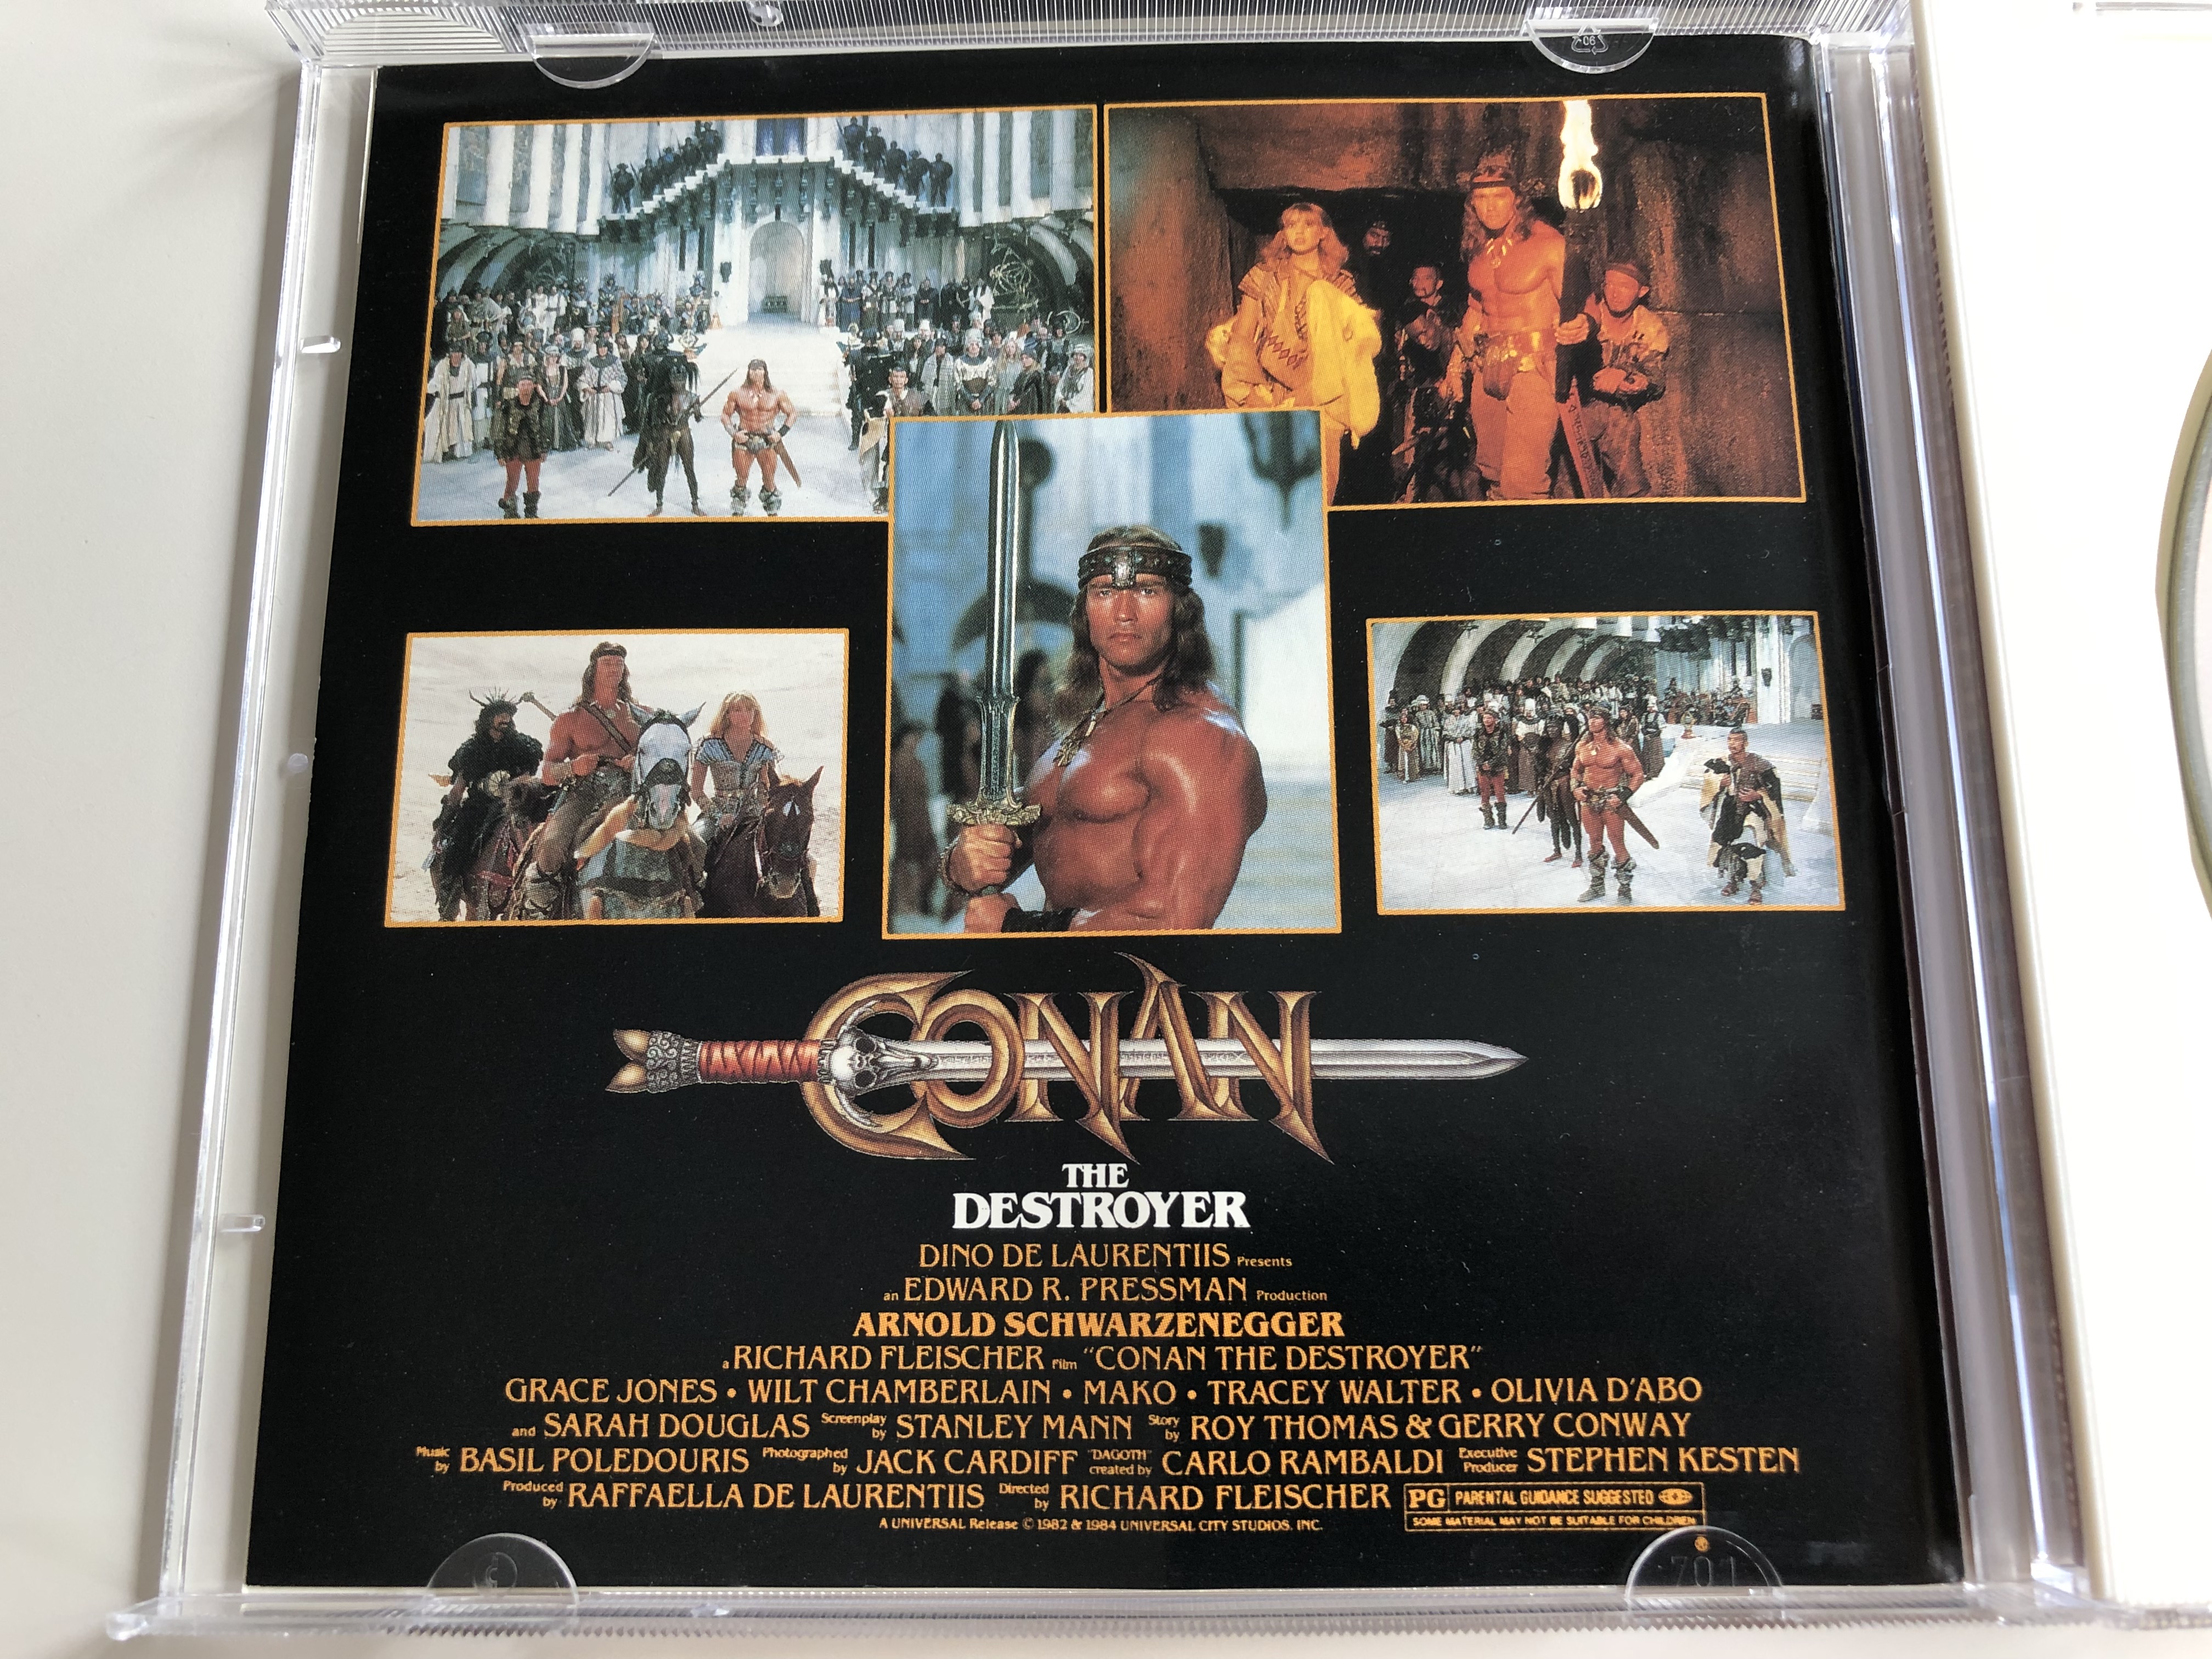 conan-the-destroyer-original-motion-picture-soundtrack-composed-and-conducted-by-basil-poledouris-audio-cd-vsd-5392-2-.jpg